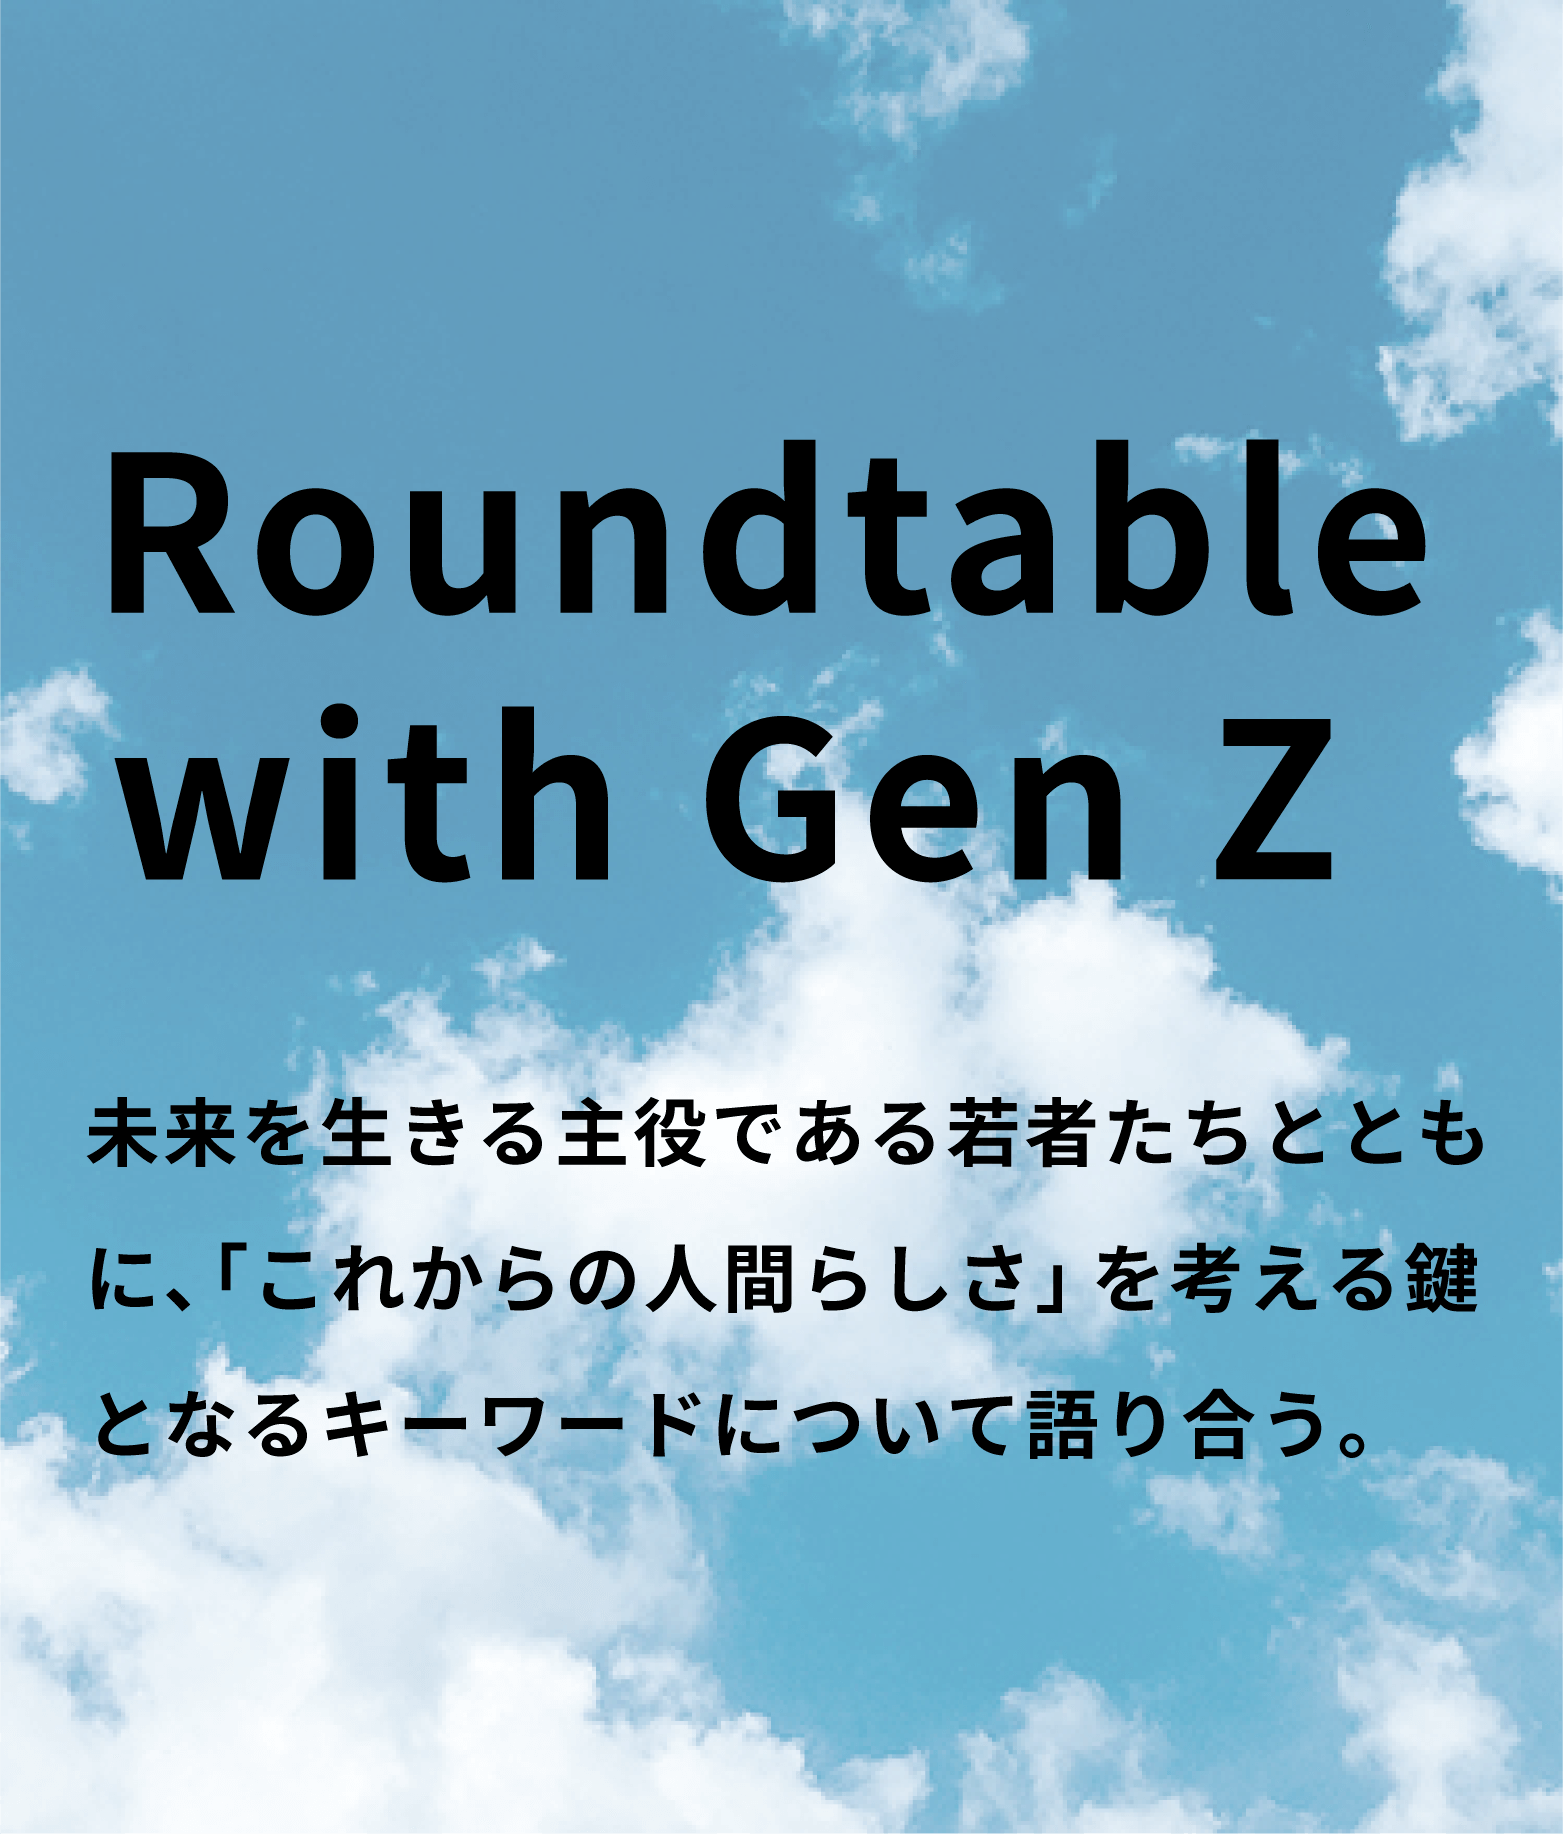 Roundtable with Gen Z